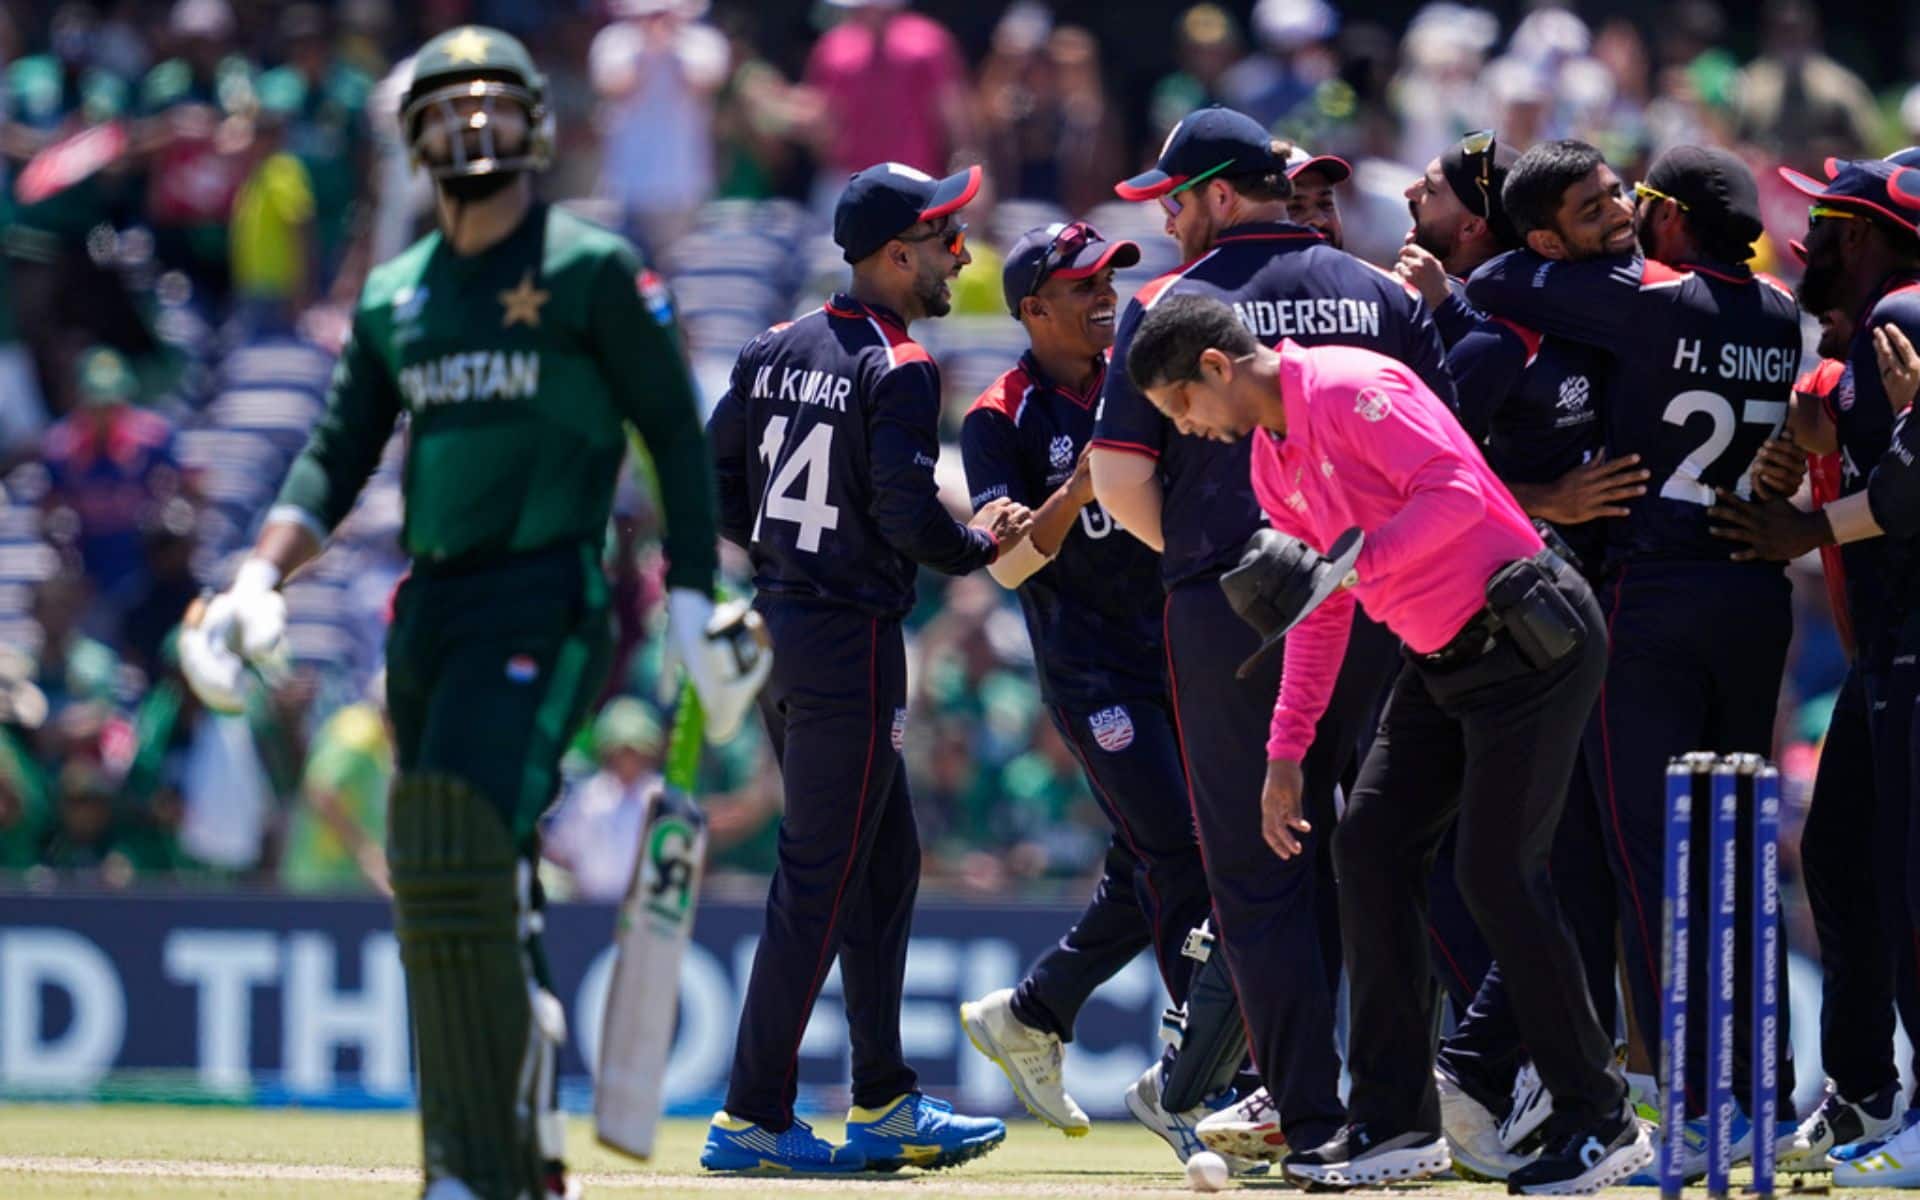 Pakistan lost to USA in T20 World Cup Group A game (AP Photo)